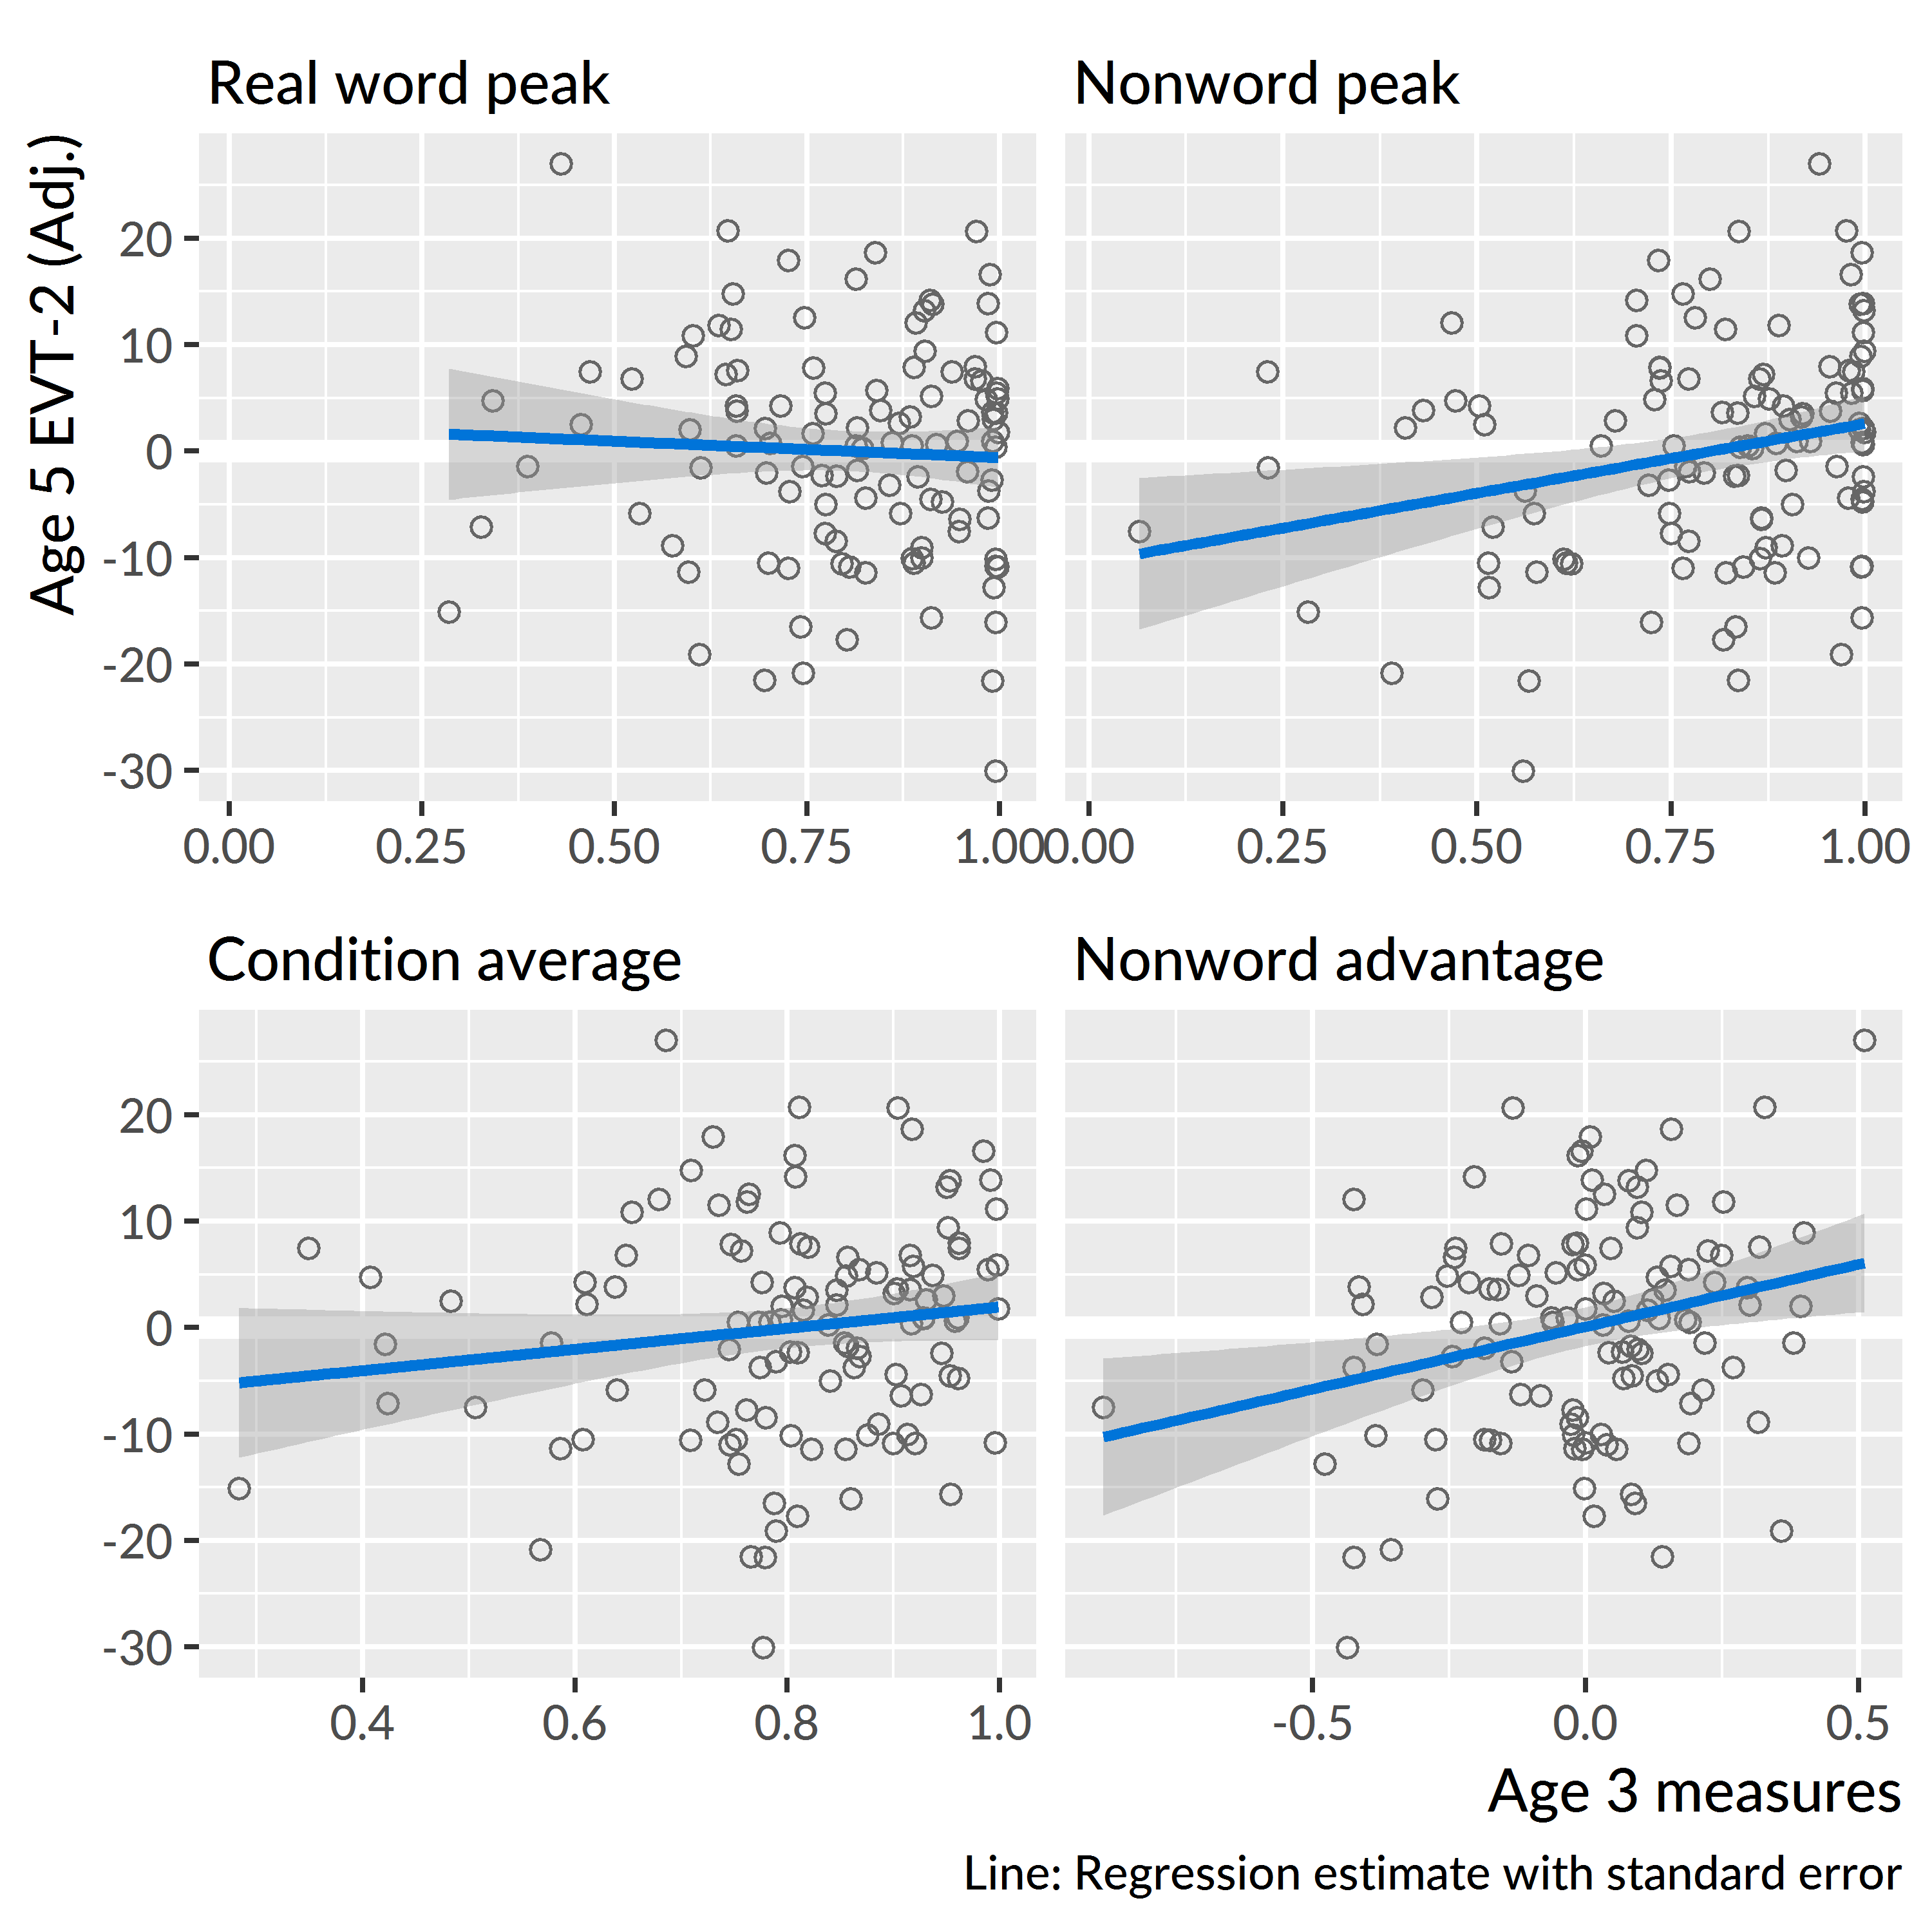 Marginal effects of age-3 referent selection measures on age-5 expressive vocabulary standard scores. The vocabulary scores were adjusted (residualized) to control for age-3 vocabulary, so these regression lines show the effects of the predictors over and above age-3 vocabulary.